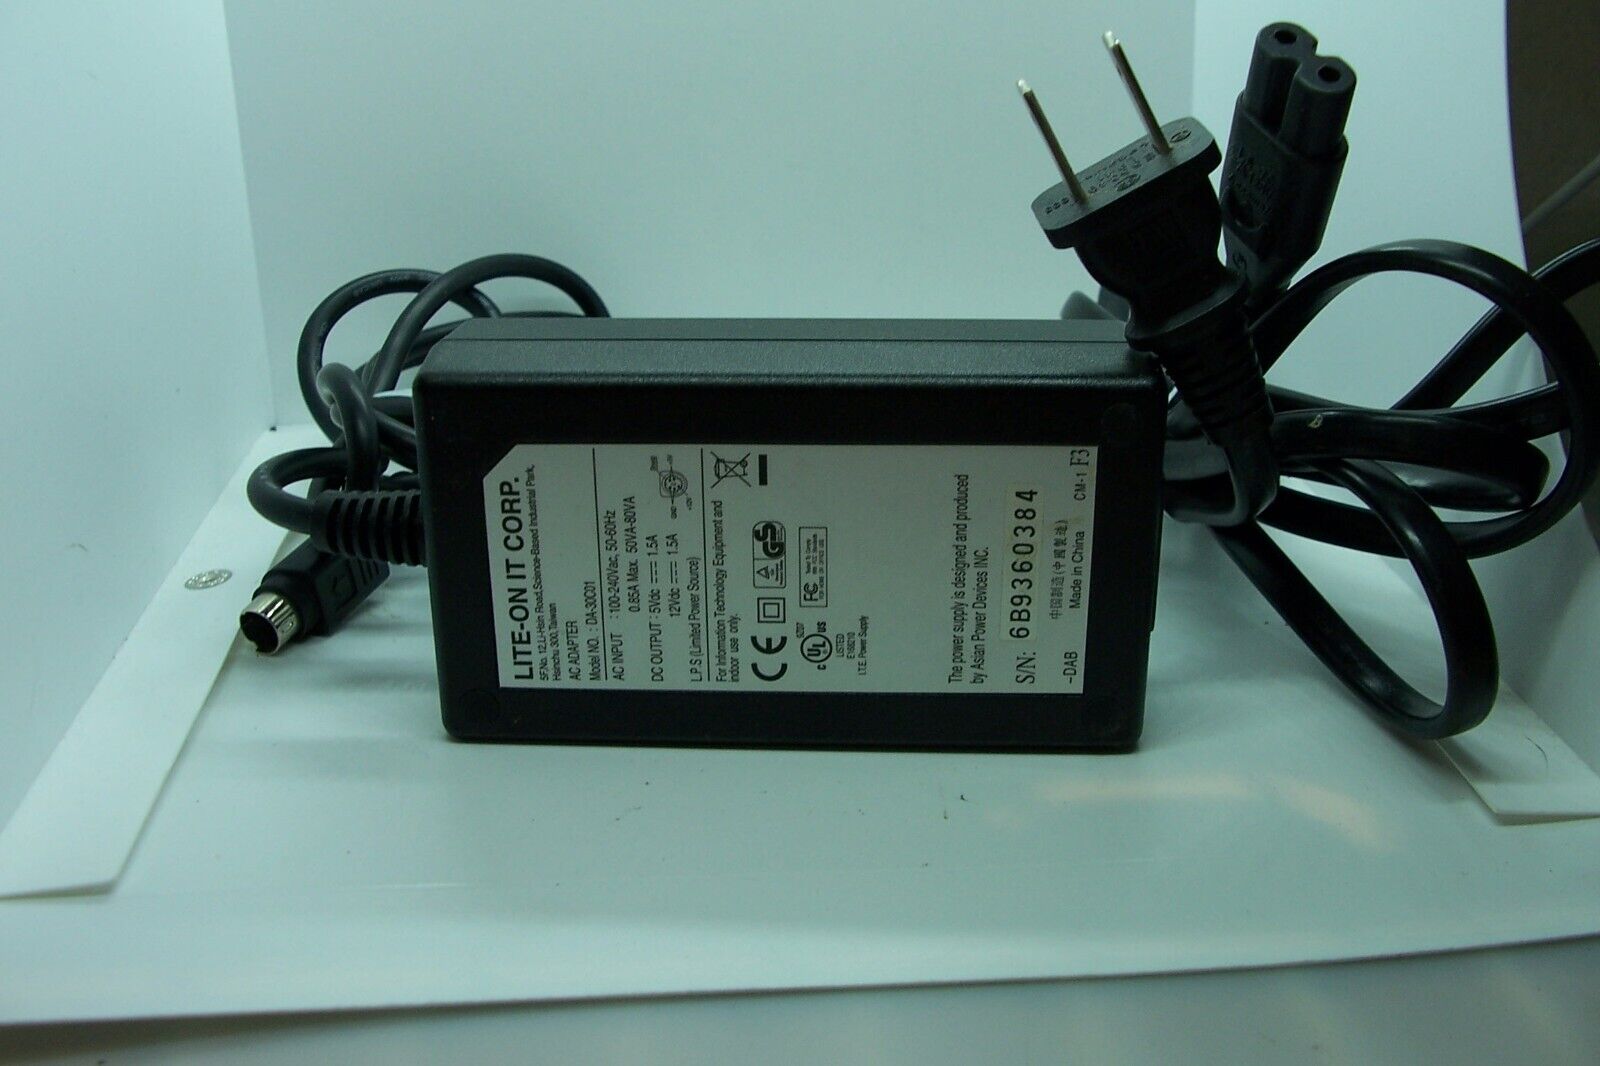 LITE-ON IT CORP Ac Adapter  Model-DA-30C01 Output- 5VDC-1.5A/12VDC-1.5A